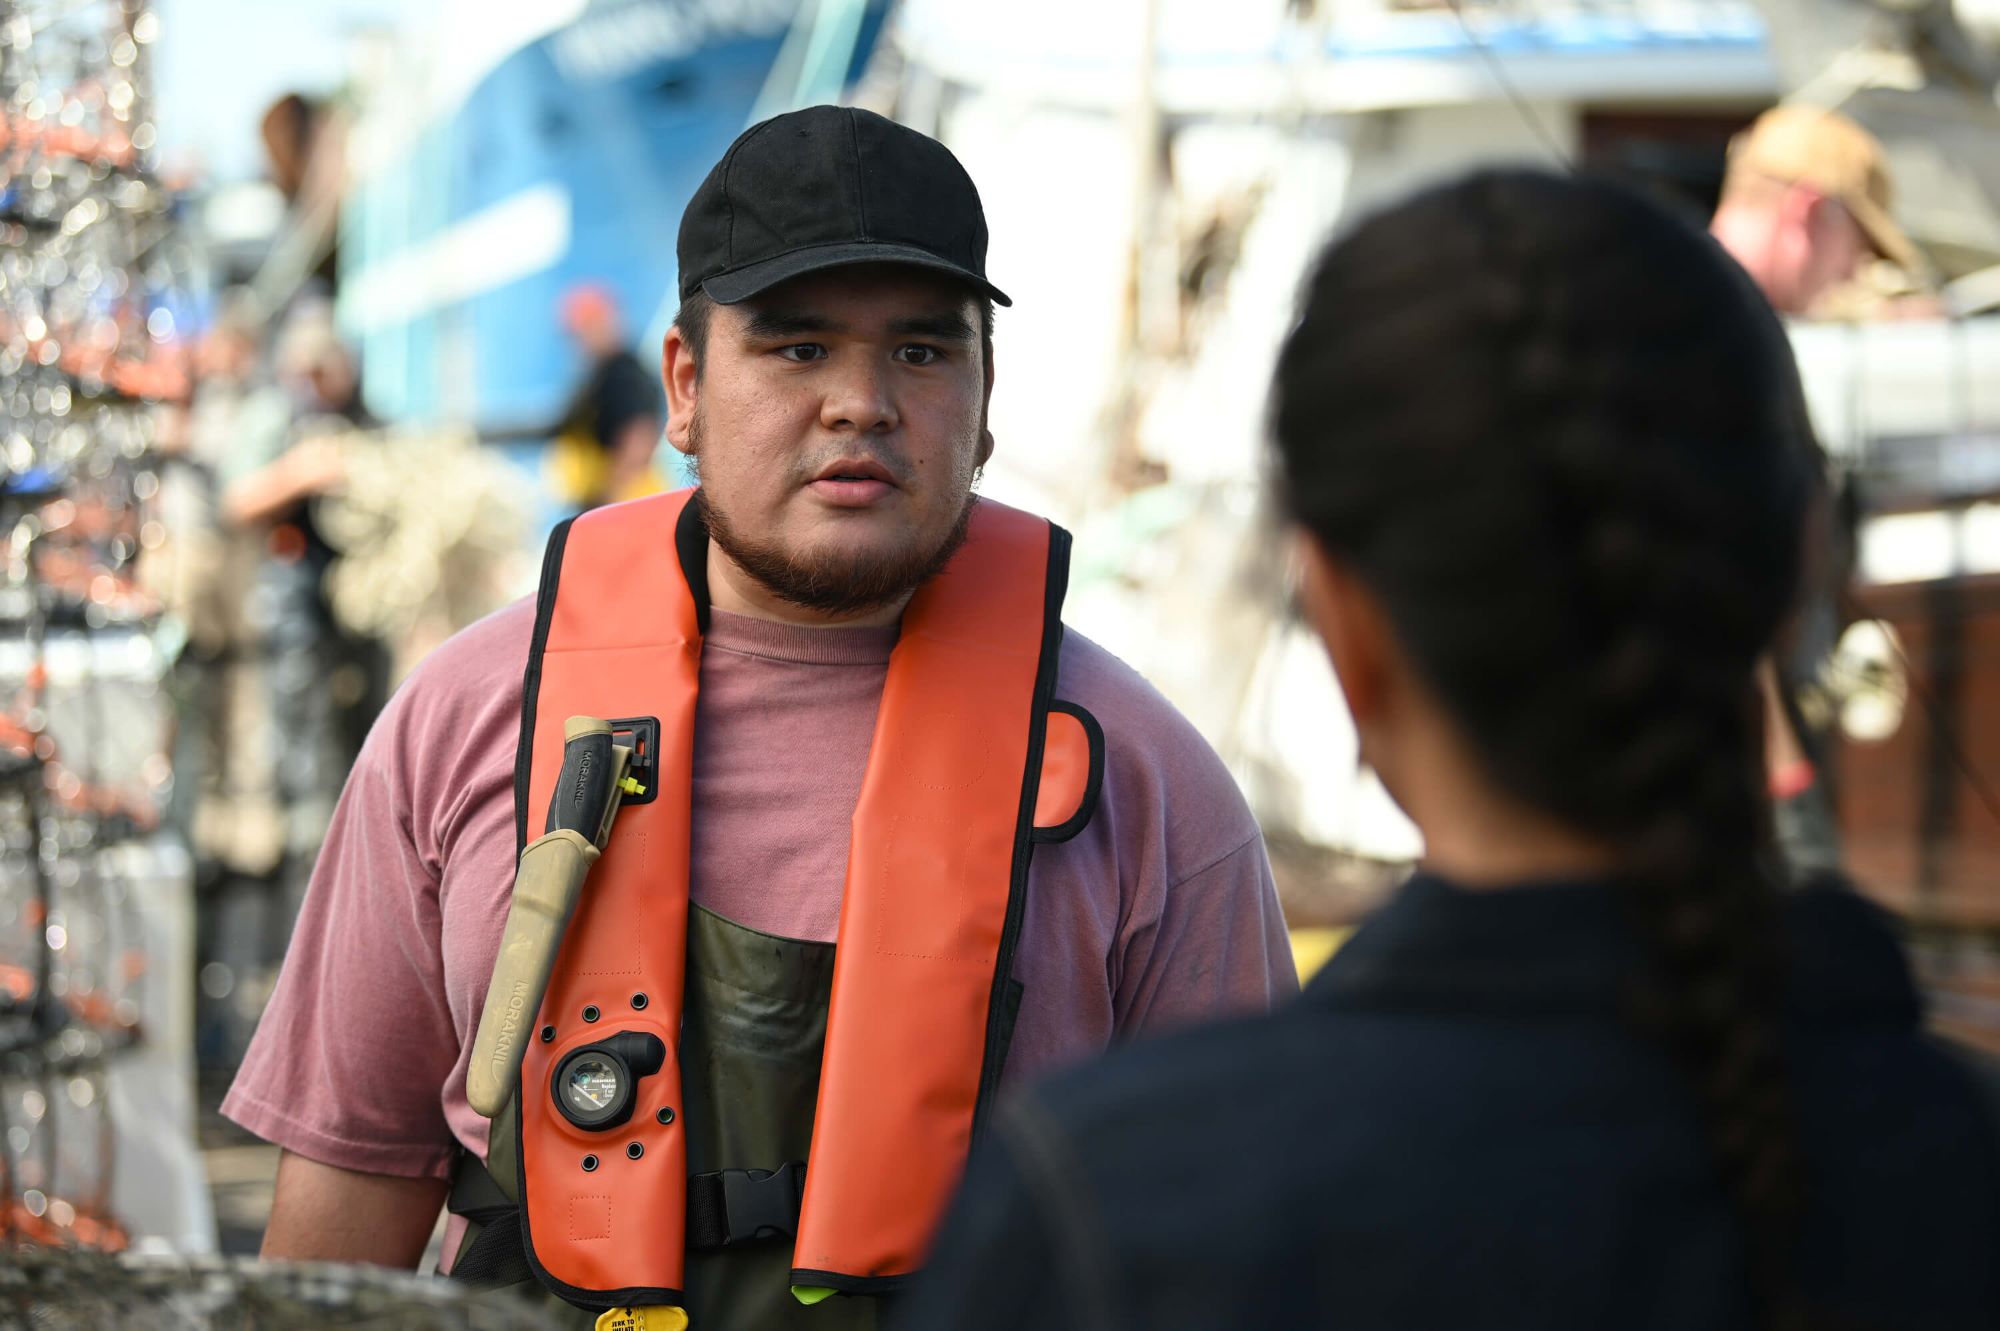 Kam Kozak, in character as Toby Crenshaw in 'Alaska Daily' Episode 2, wears an orange life vest over a pink shirt and a black baseball cap.